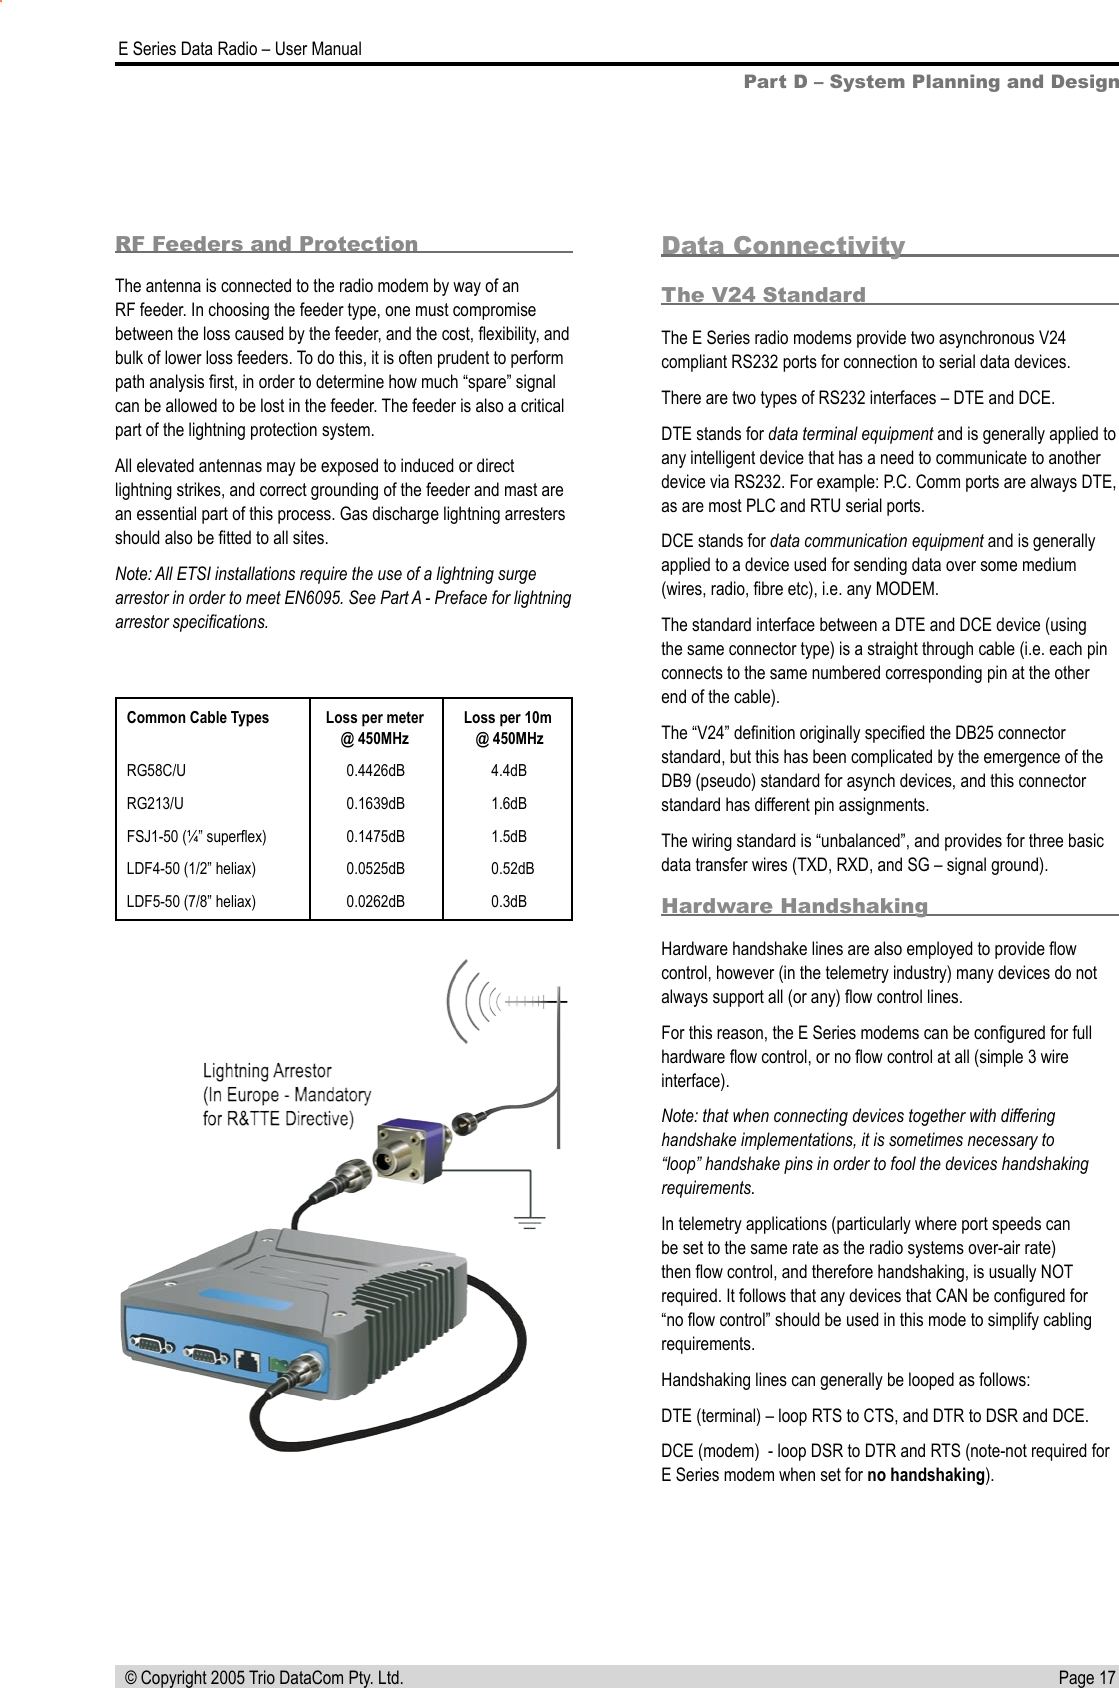 Page 17  E Series Data Radio – User Manual © Copyright 2005 Trio DataCom Pty. Ltd.Part D – System Planning and DesignCommon Cable Types  Loss per meter  Loss per 10m  @ 450MHz   @ 450MHzRG58C/U  0.4426dB  4.4dBRG213/U  0.1639dB  1.6dBFSJ1-50 (¼” superﬂex)  0.1475dB  1.5dBLDF4-50 (1/2” heliax)  0.0525dB  0.52dBLDF5-50 (7/8” heliax)  0.0262dB  0.3dBData ConnectivityThe V24 StandardThe E Series radio modems provide two asynchronous V24 compliant RS232 ports for connection to serial data devices.There are two types of RS232 interfaces – DTE and DCE.DTE stands for data terminal equipment and is generally applied to any intelligent device that has a need to communicate to another device via RS232. For example: P.C. Comm ports are always DTE, as are most PLC and RTU serial ports.DCE stands for data communication equipment and is generally applied to a device used for sending data over some medium (wires, radio, ﬁbre etc), i.e. any MODEM.The standard interface between a DTE and DCE device (using the same connector type) is a straight through cable (i.e. each pin connects to the same numbered corresponding pin at the other end of the cable).The “V24” deﬁnition originally speciﬁed the DB25 connector standard, but this has been complicated by the emergence of the DB9 (pseudo) standard for asynch devices, and this connector standard has different pin assignments.The wiring standard is “unbalanced”, and provides for three basic data transfer wires (TXD, RXD, and SG – signal ground).Hardware HandshakingHardware handshake lines are also employed to provide ﬂow control, however (in the telemetry industry) many devices do not always support all (or any) ﬂow control lines.For this reason, the E Series modems can be conﬁgured for full hardware ﬂow control, or no ﬂow control at all (simple 3 wire interface).Note: that when connecting devices together with differing handshake implementations, it is sometimes necessary to “loop” handshake pins in order to fool the devices handshaking requirements.In telemetry applications (particularly where port speeds can be set to the same rate as the radio systems over-air rate) then ﬂow control, and therefore handshaking, is usually NOT required. It follows that any devices that CAN be conﬁgured for “no ﬂow control” should be used in this mode to simplify cabling requirements.Handshaking lines can generally be looped as follows:DTE (terminal) – loop RTS to CTS, and DTR to DSR and DCE.DCE (modem)  - loop DSR to DTR and RTS (note-not required for E Series modem when set for no handshaking).RF Feeders and ProtectionThe antenna is connected to the radio modem by way of an RF feeder. In choosing the feeder type, one must compromise between the loss caused by the feeder, and the cost, ﬂexibility, and bulk of lower loss feeders. To do this, it is often prudent to perform path analysis ﬁrst, in order to determine how much “spare” signal can be allowed to be lost in the feeder. The feeder is also a critical part of the lightning protection system.All elevated antennas may be exposed to induced or direct lightning strikes, and correct grounding of the feeder and mast are an essential part of this process. Gas discharge lightning arresters should also be ﬁtted to all sites.Note: All ETSI installations require the use of a lightning surge arrestor in order to meet EN6095. See Part A - Preface for lightning arrestor speciﬁcations.